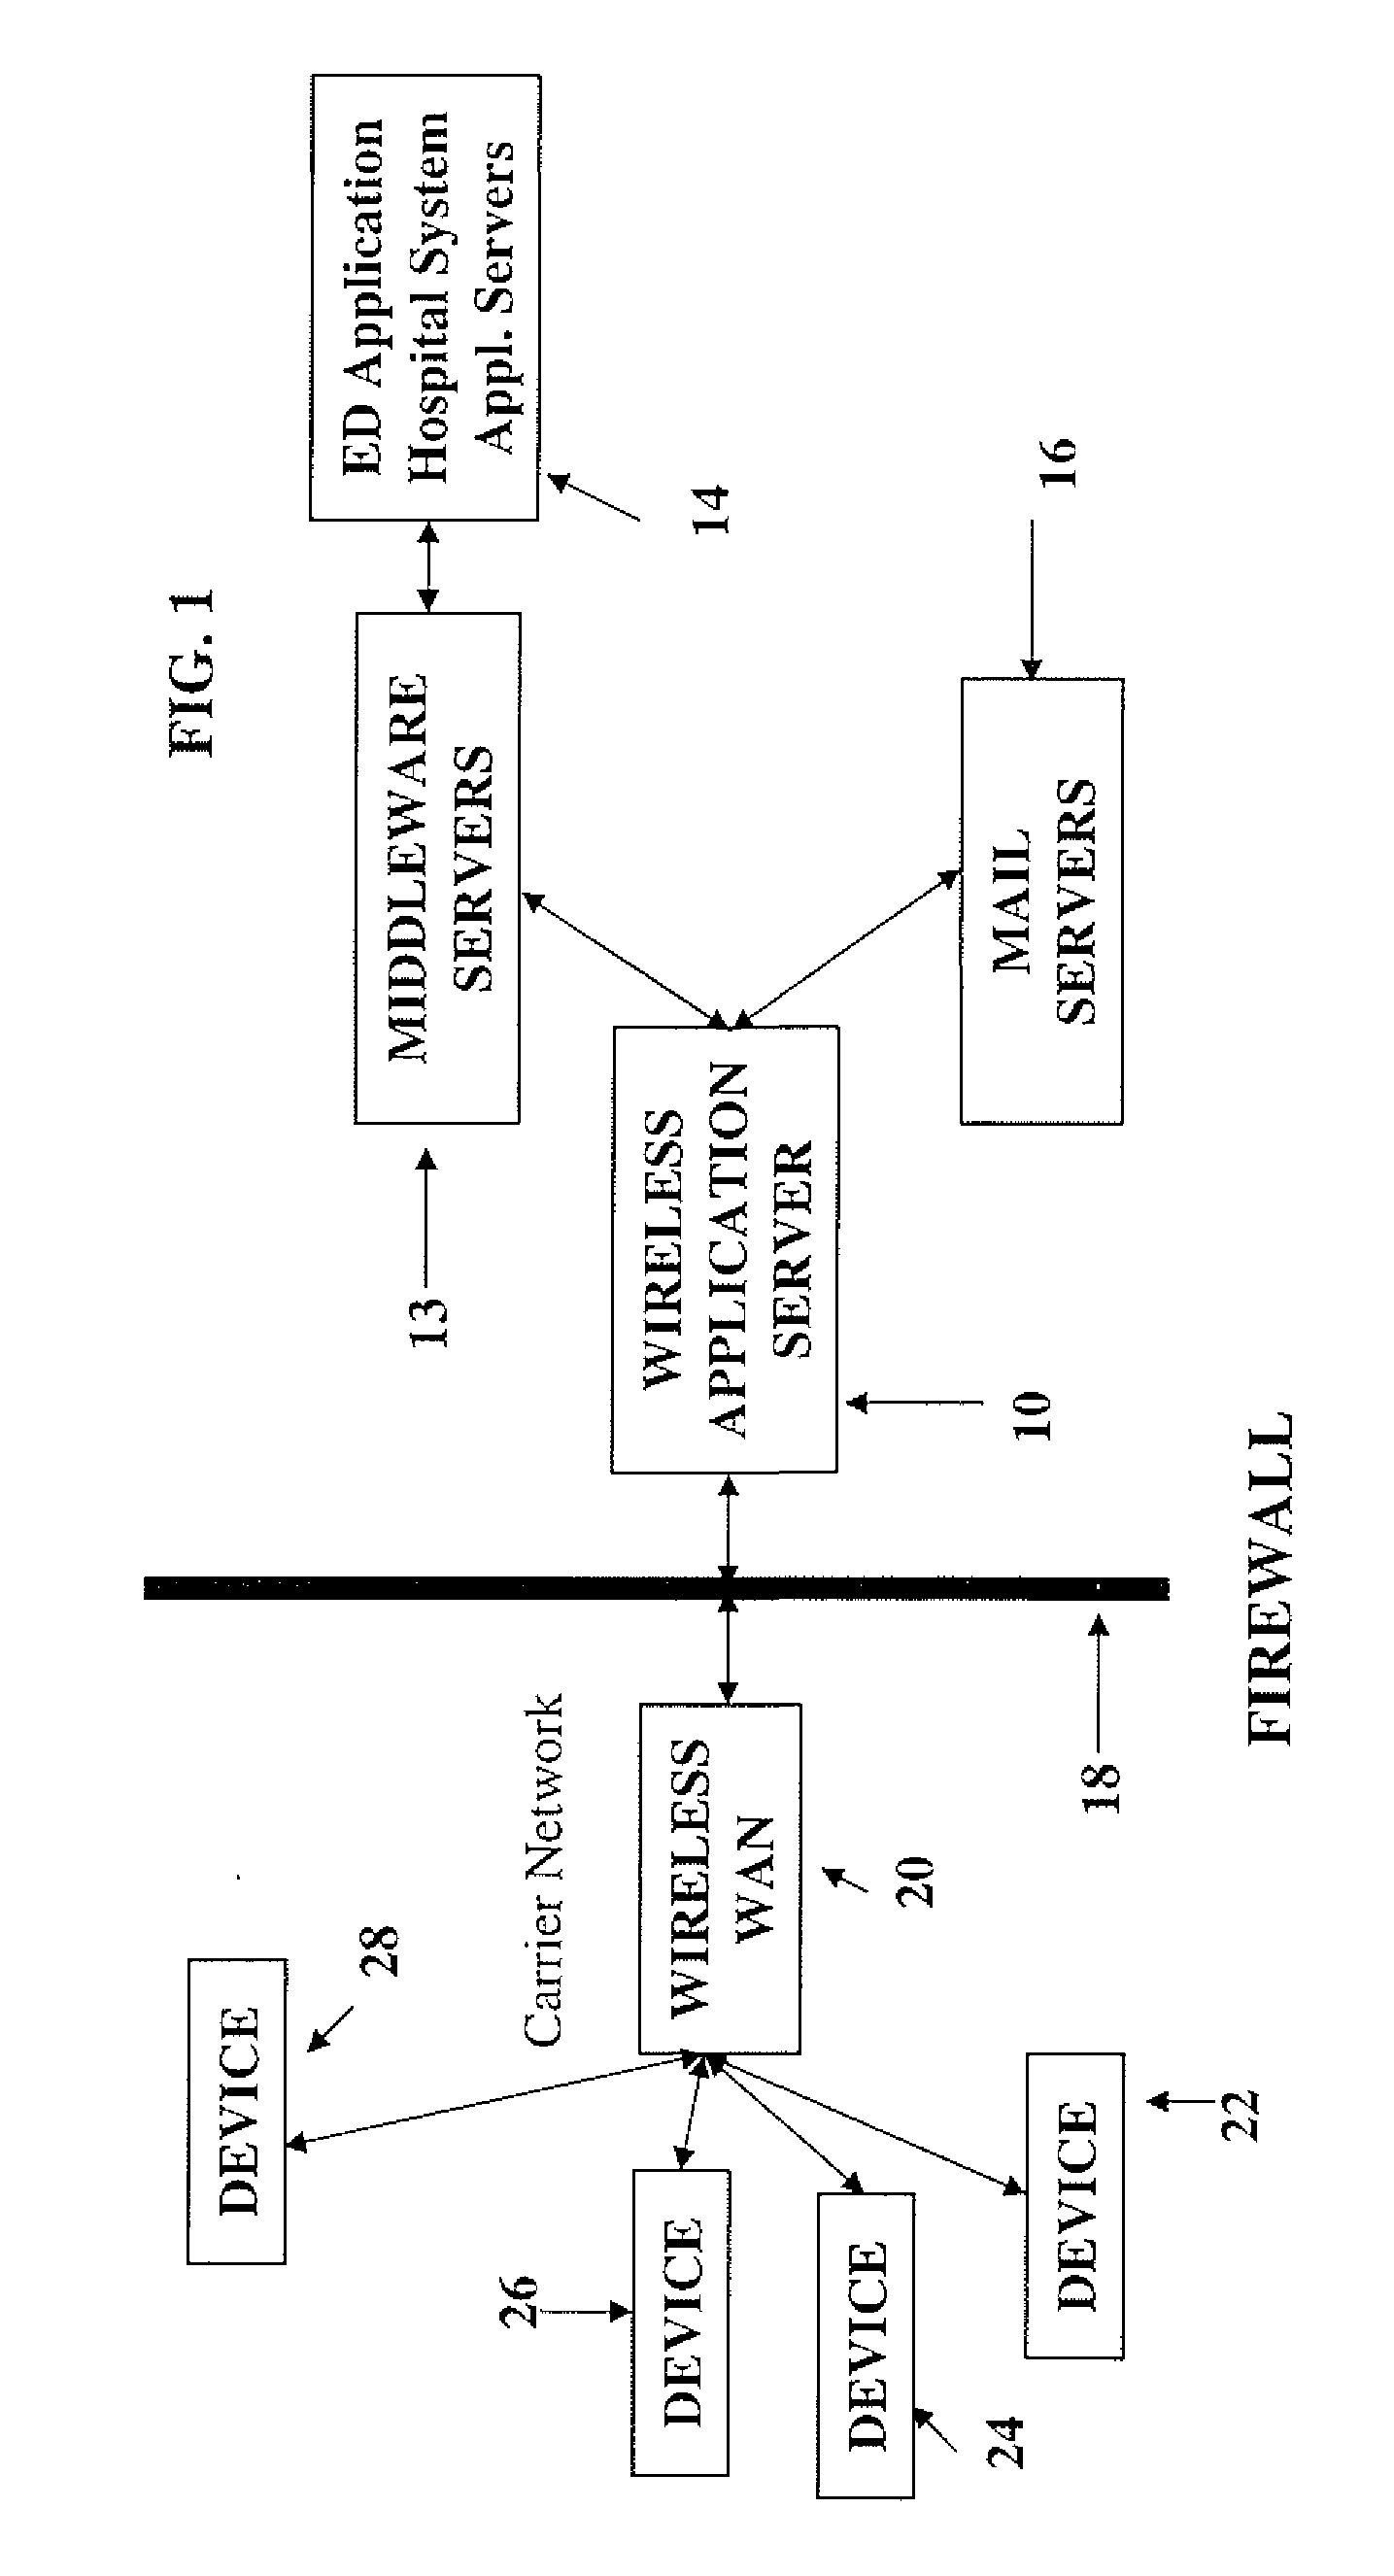 System and Method for Processing Health Information